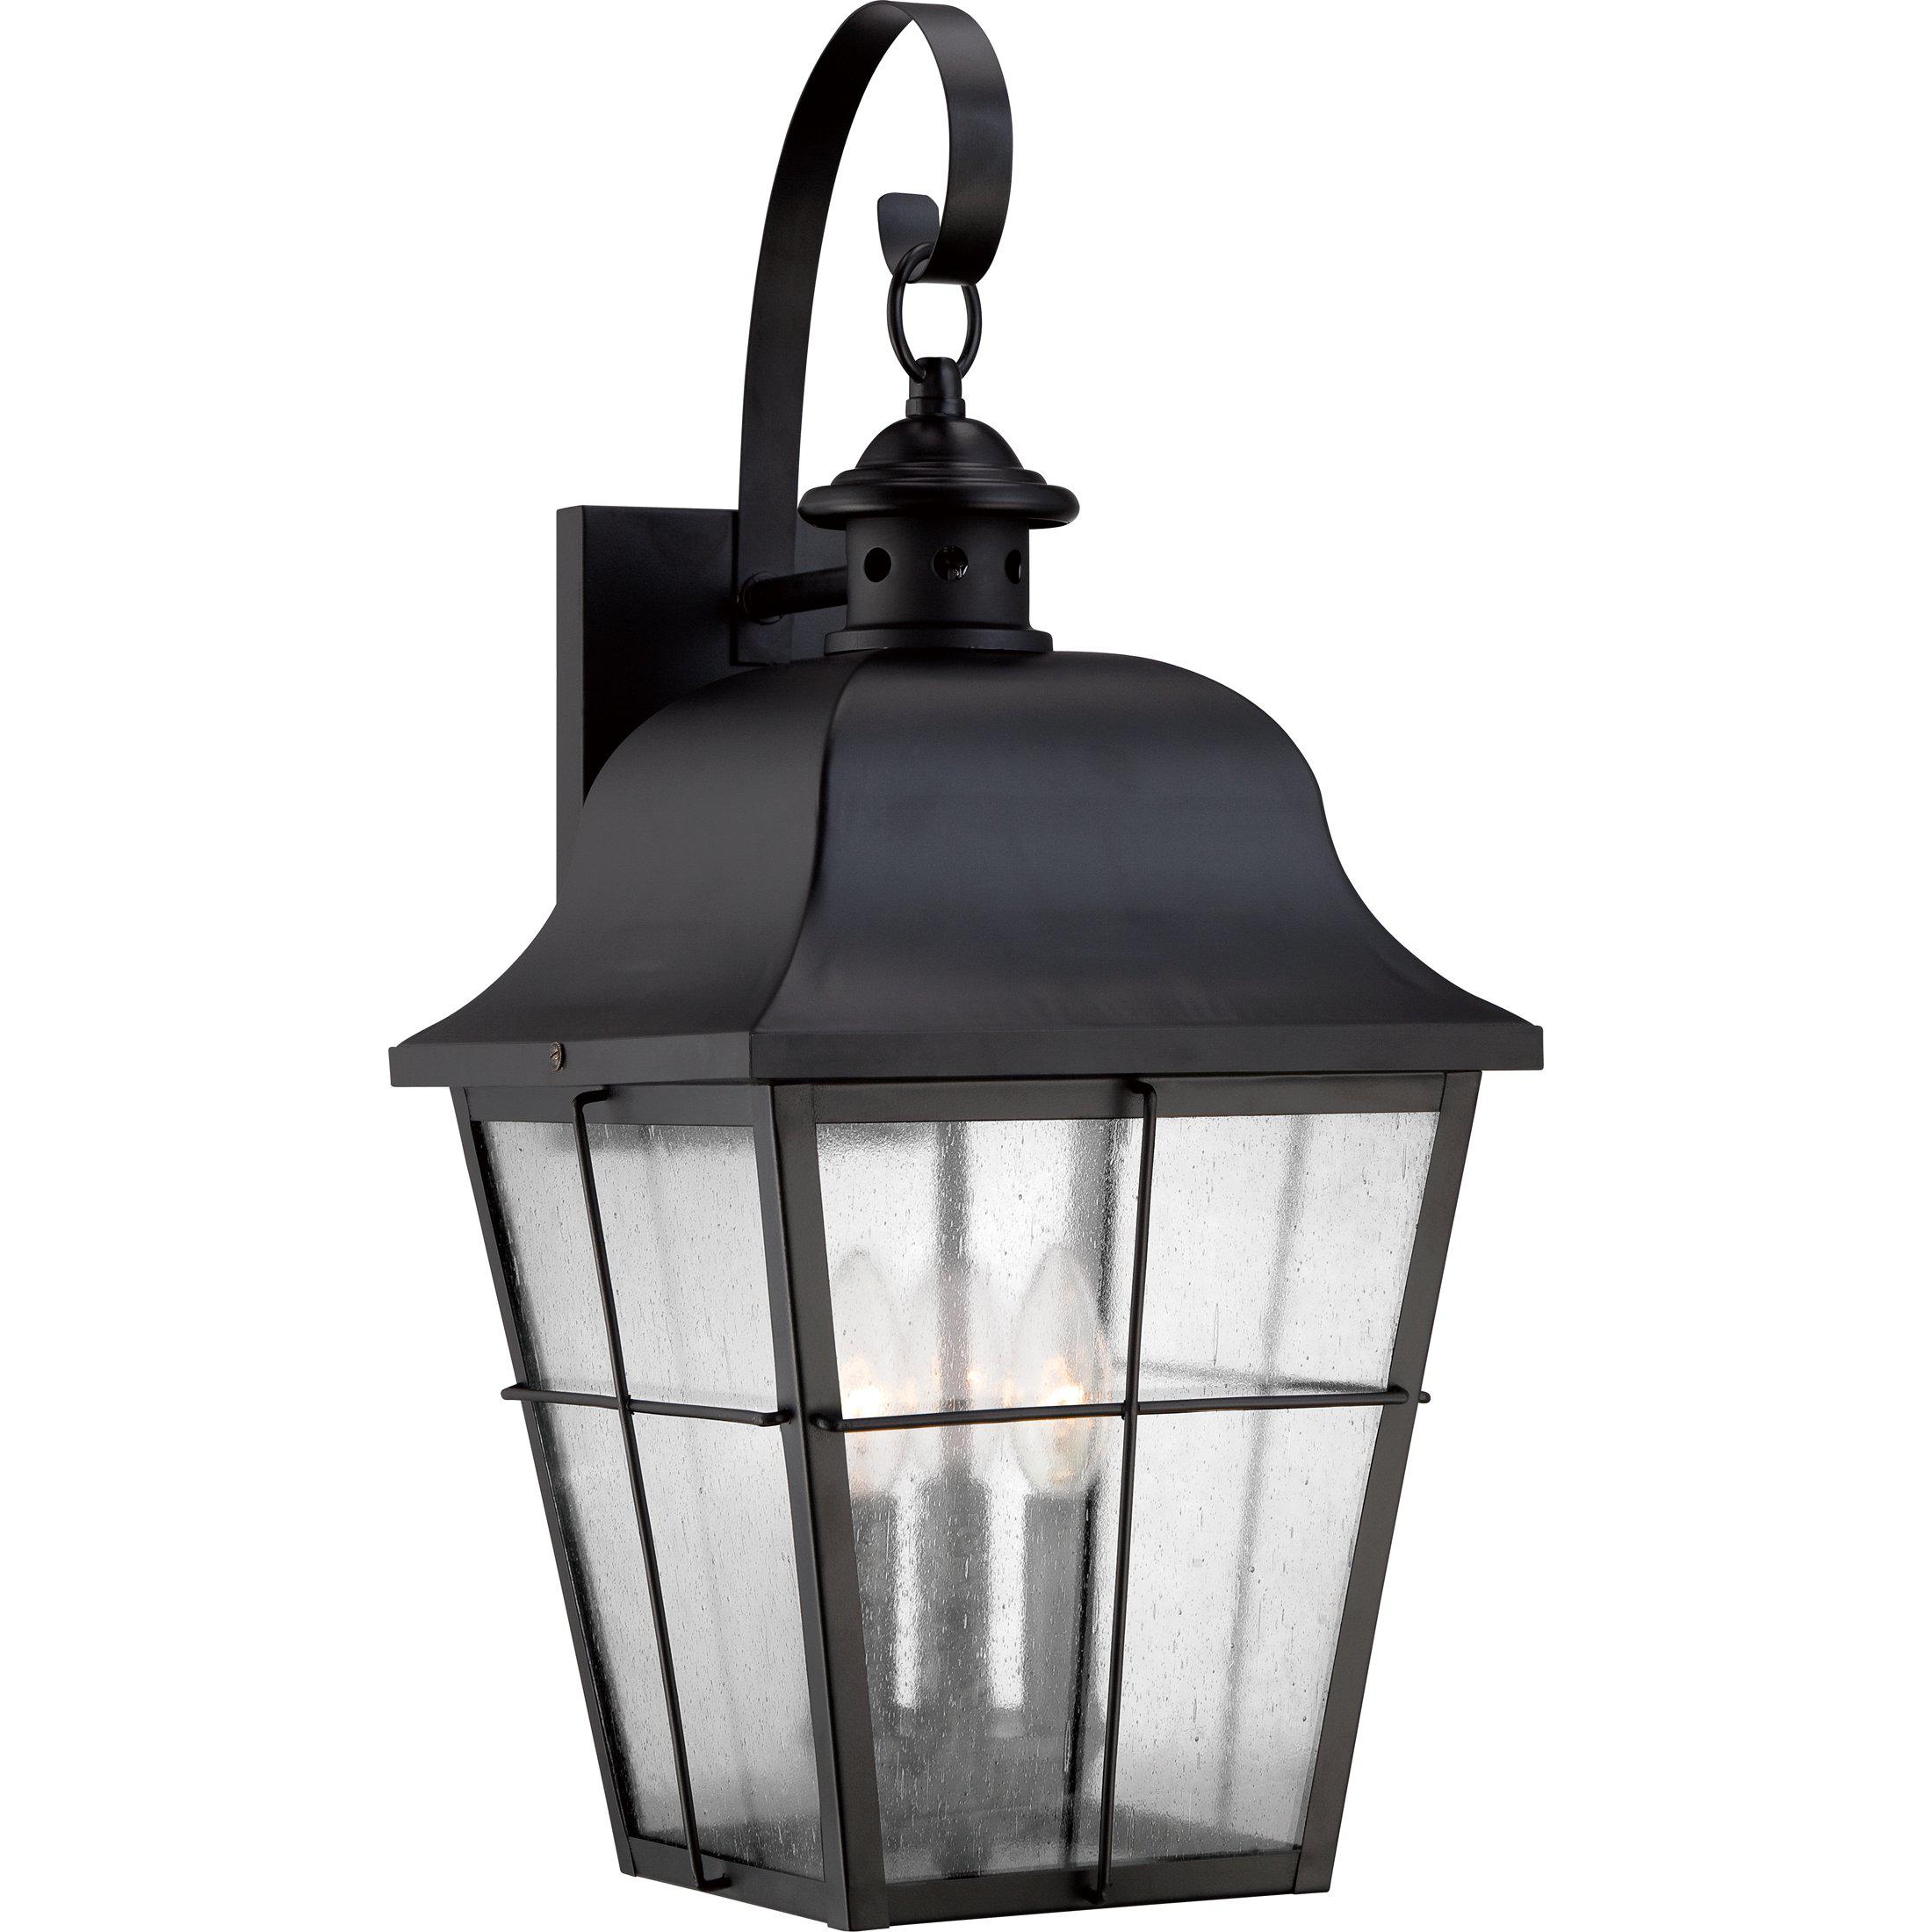 Quoizel  Millhouse Outdoor Lantern, Large Outdoor l Wall Quoizel Mystic Black  